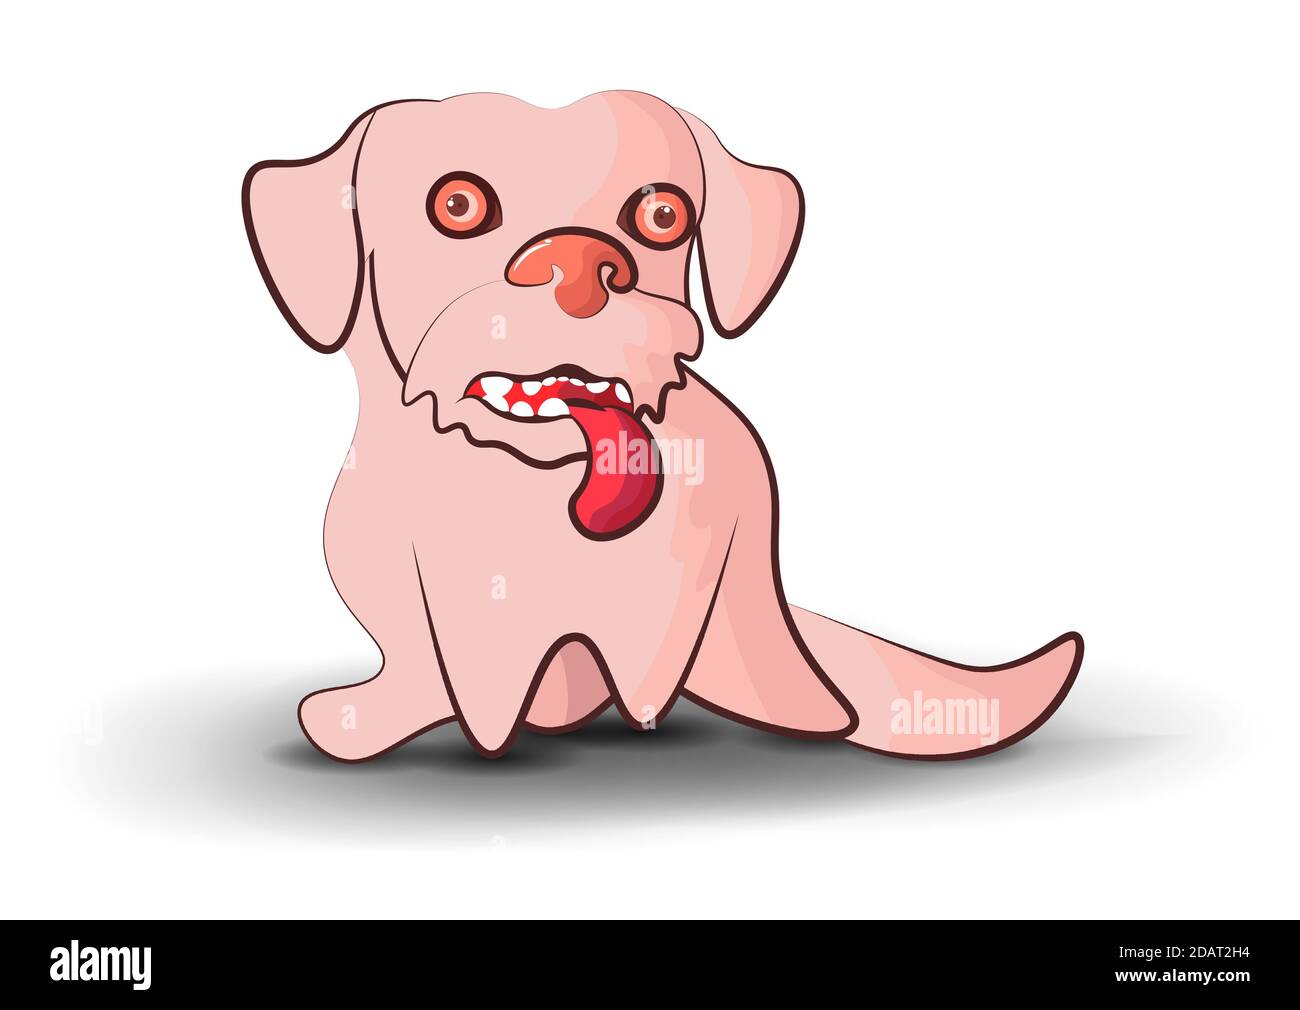 little crazy dog with big eyes. Funny illustration on a white background Stock Vector